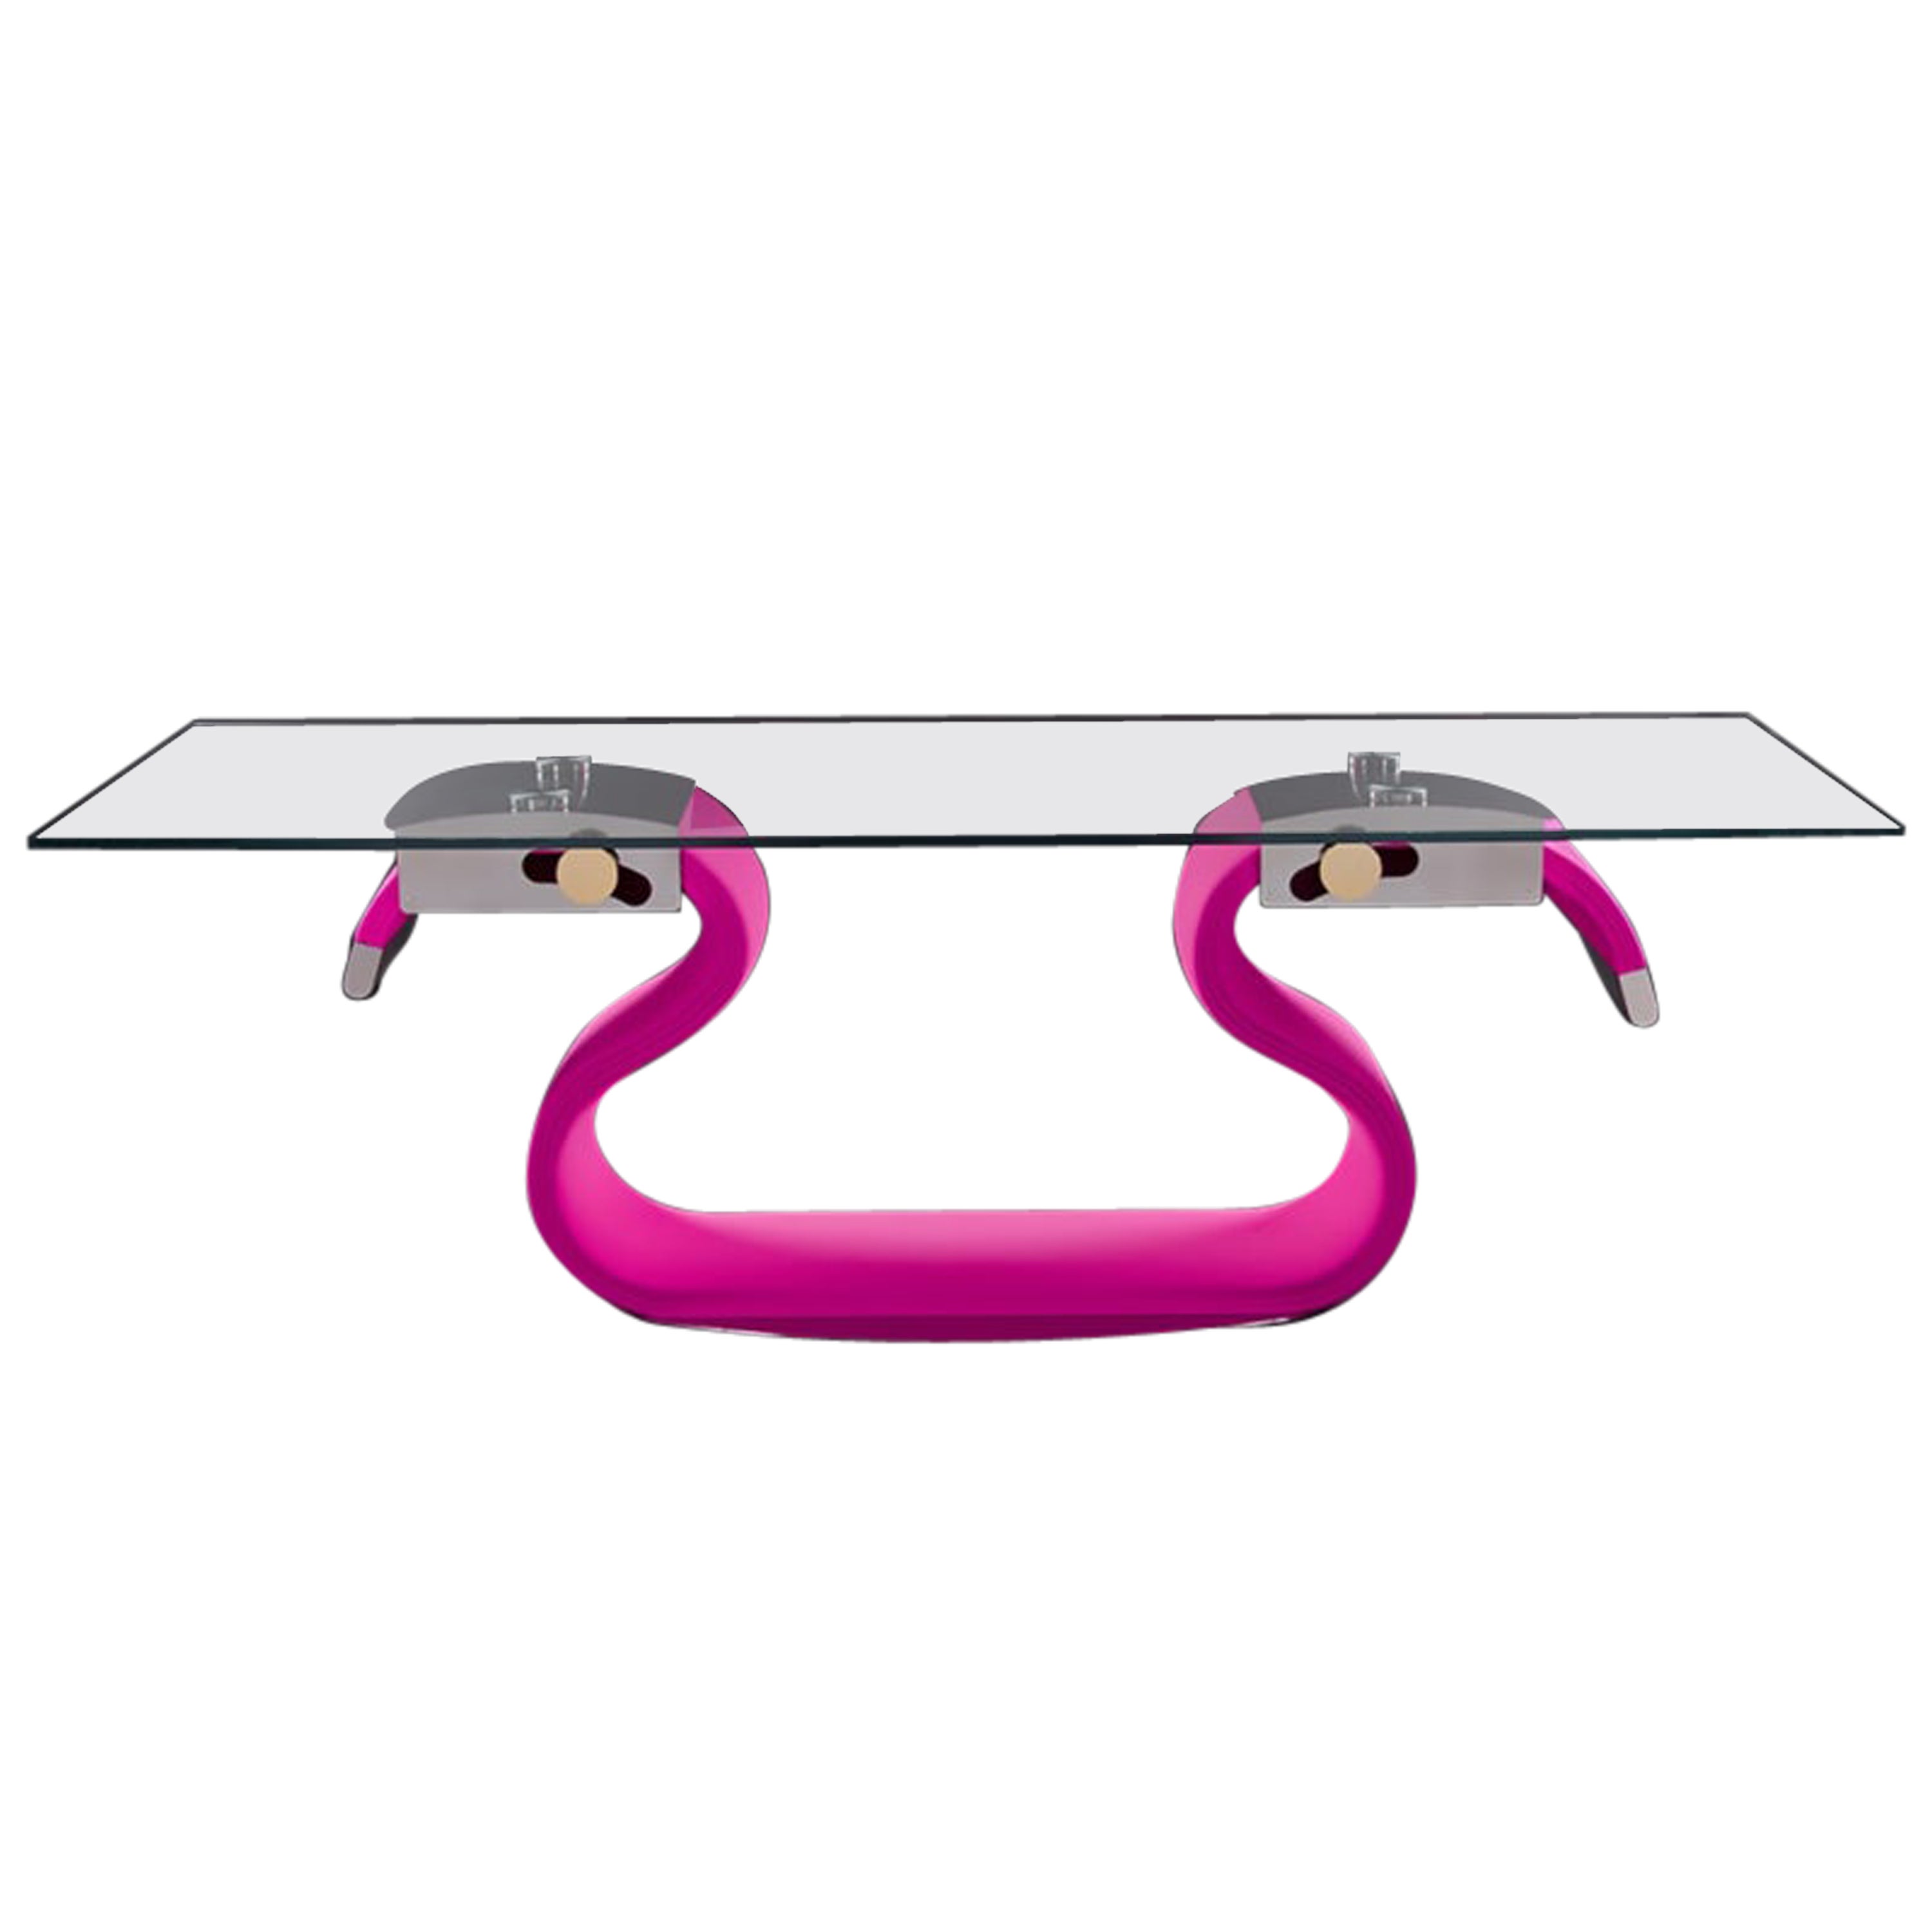 Seatbelt Table Desk in Aluminium, Textile and Glass by Damiano Spelta For Sale